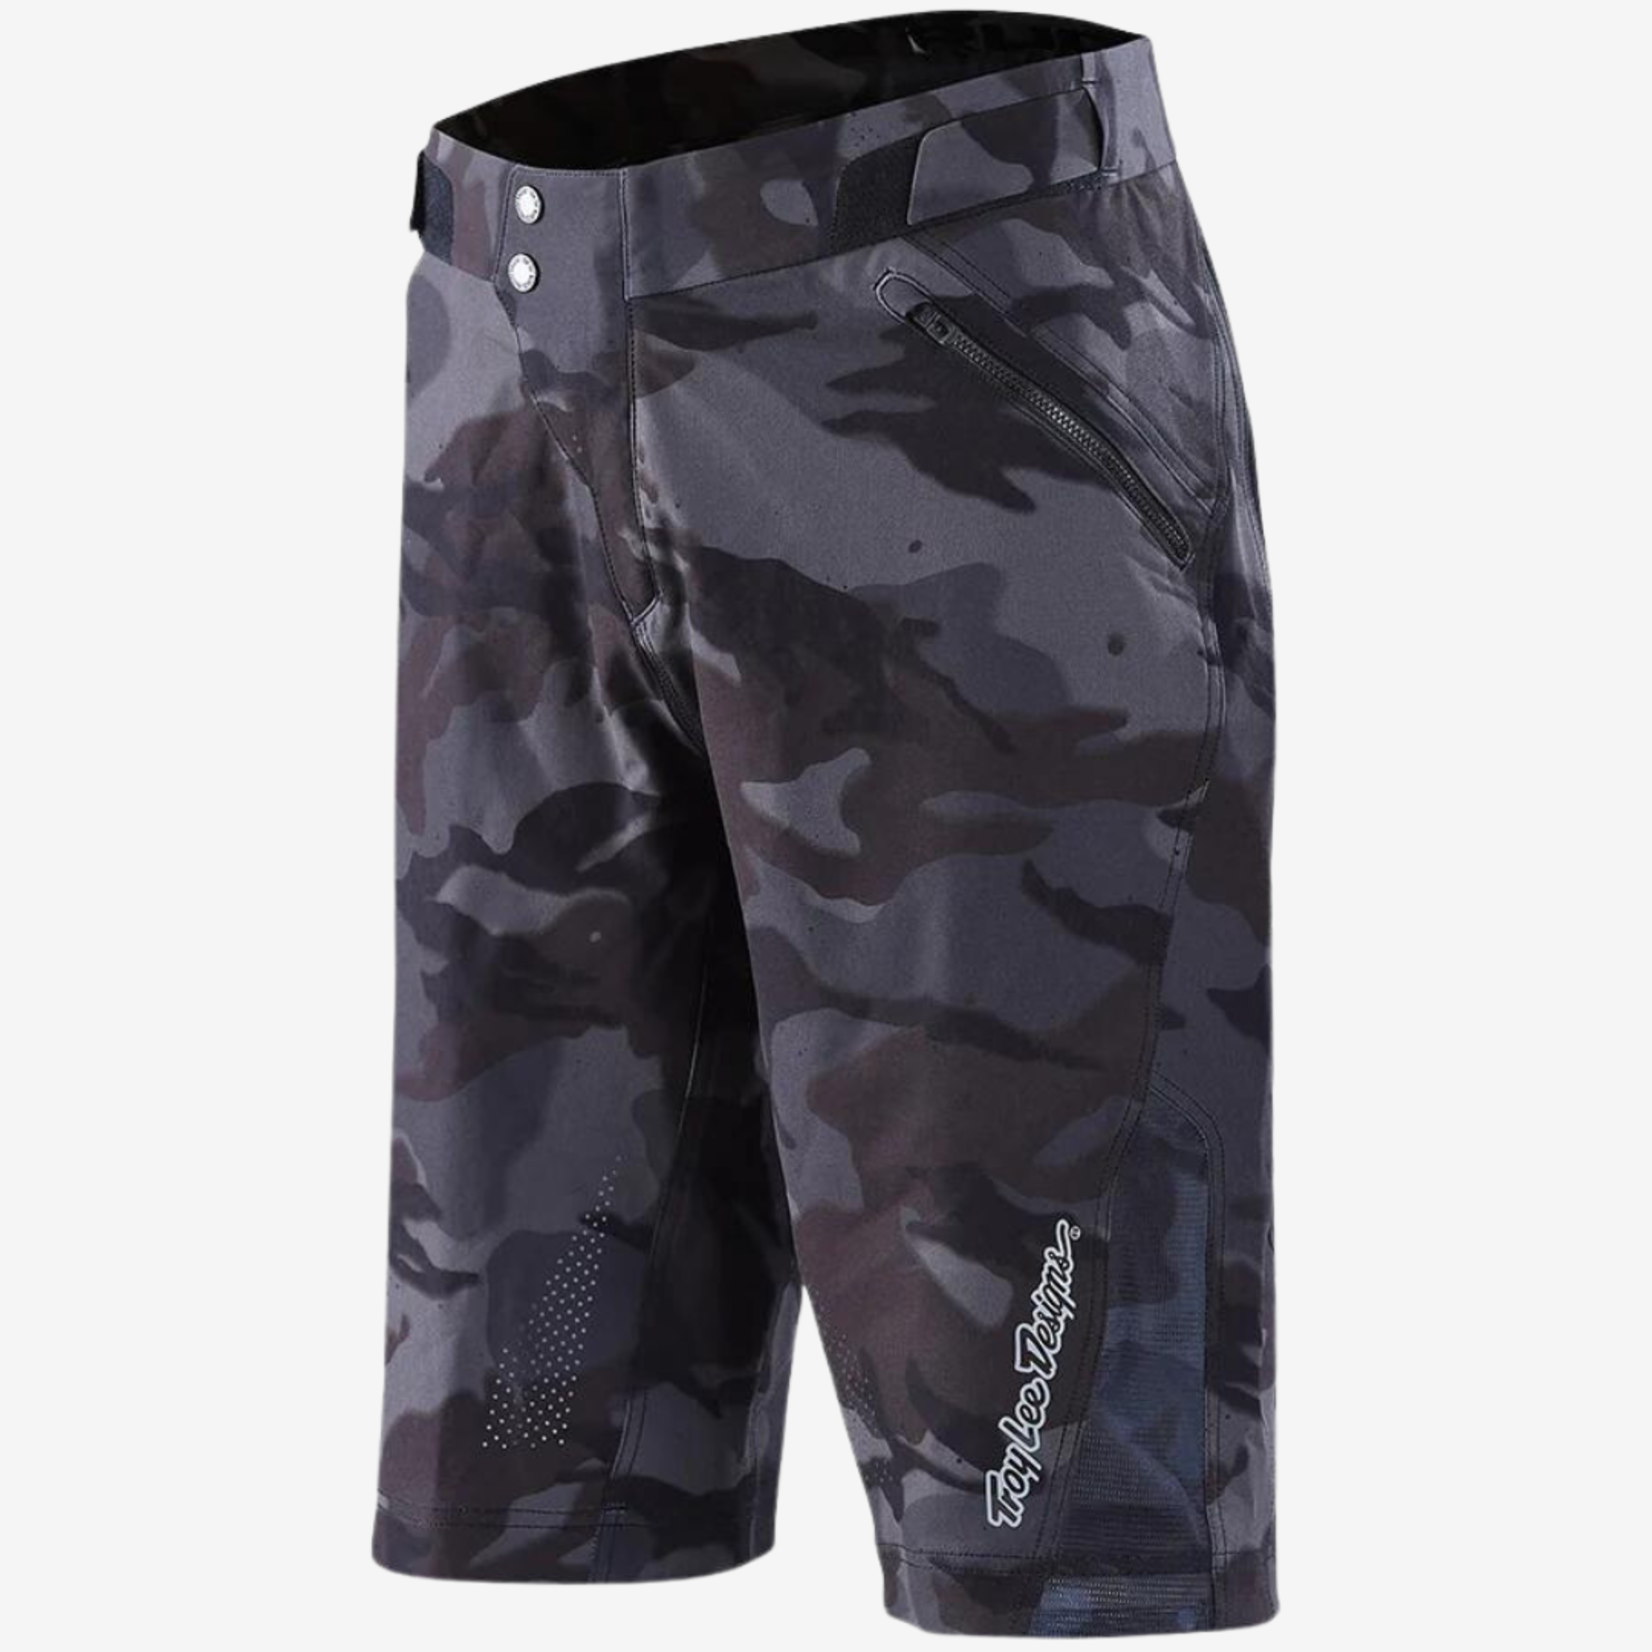 TROY LEE DESIGNS RUCKUS SHORTS WITH LINER